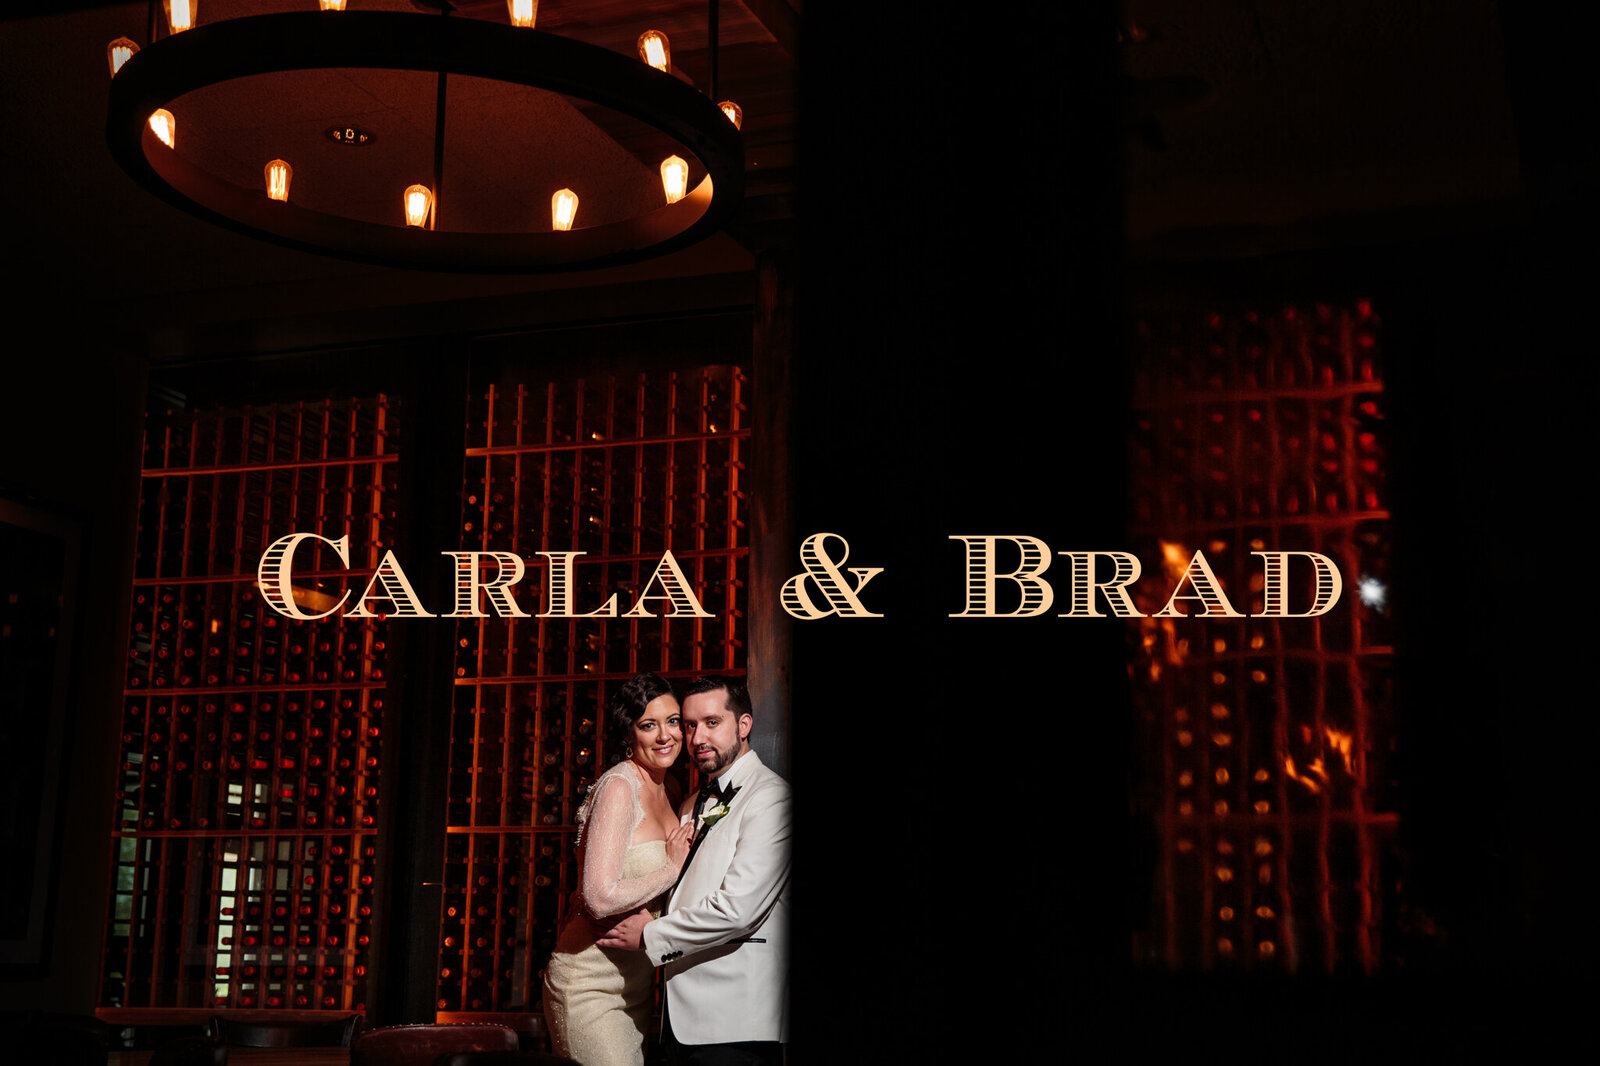 Stunning bride and groom embrace for portrait in wine cellar